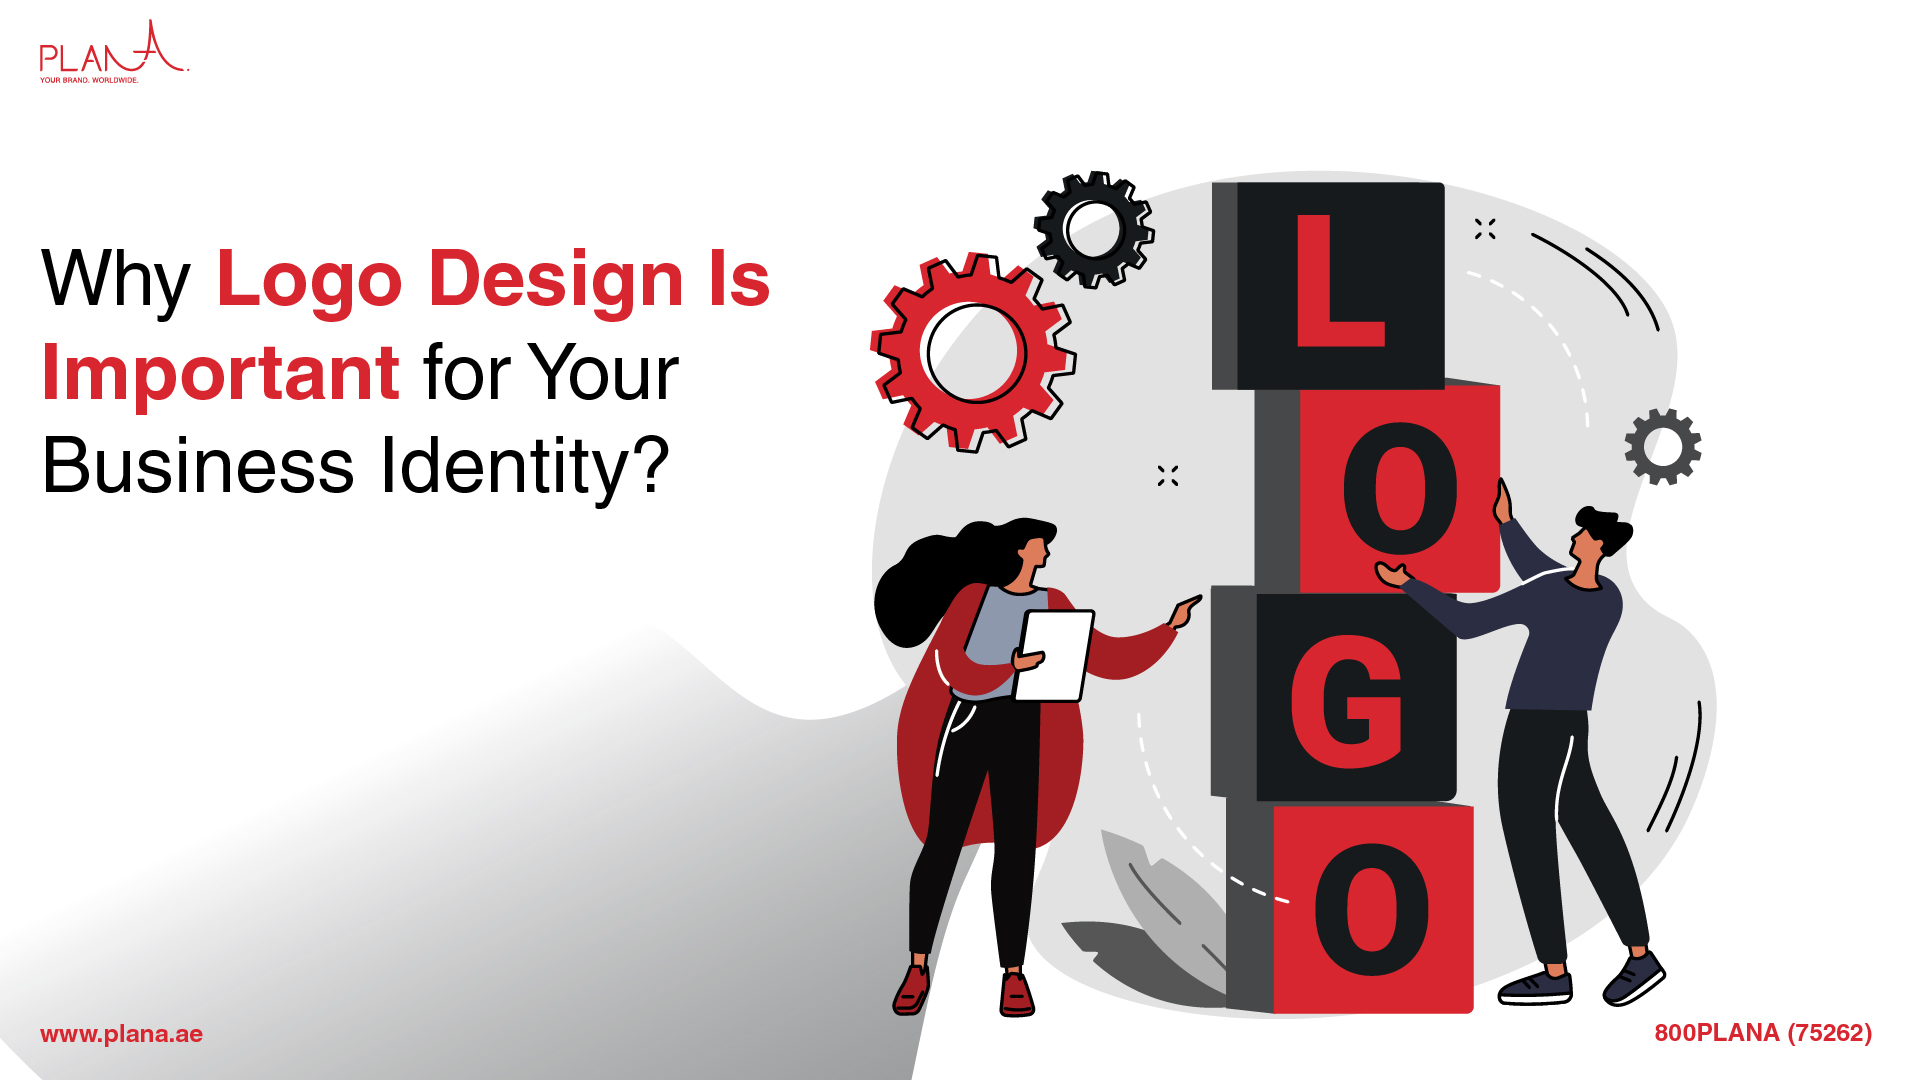 Why Logo Design Is Important for Your Business Identity